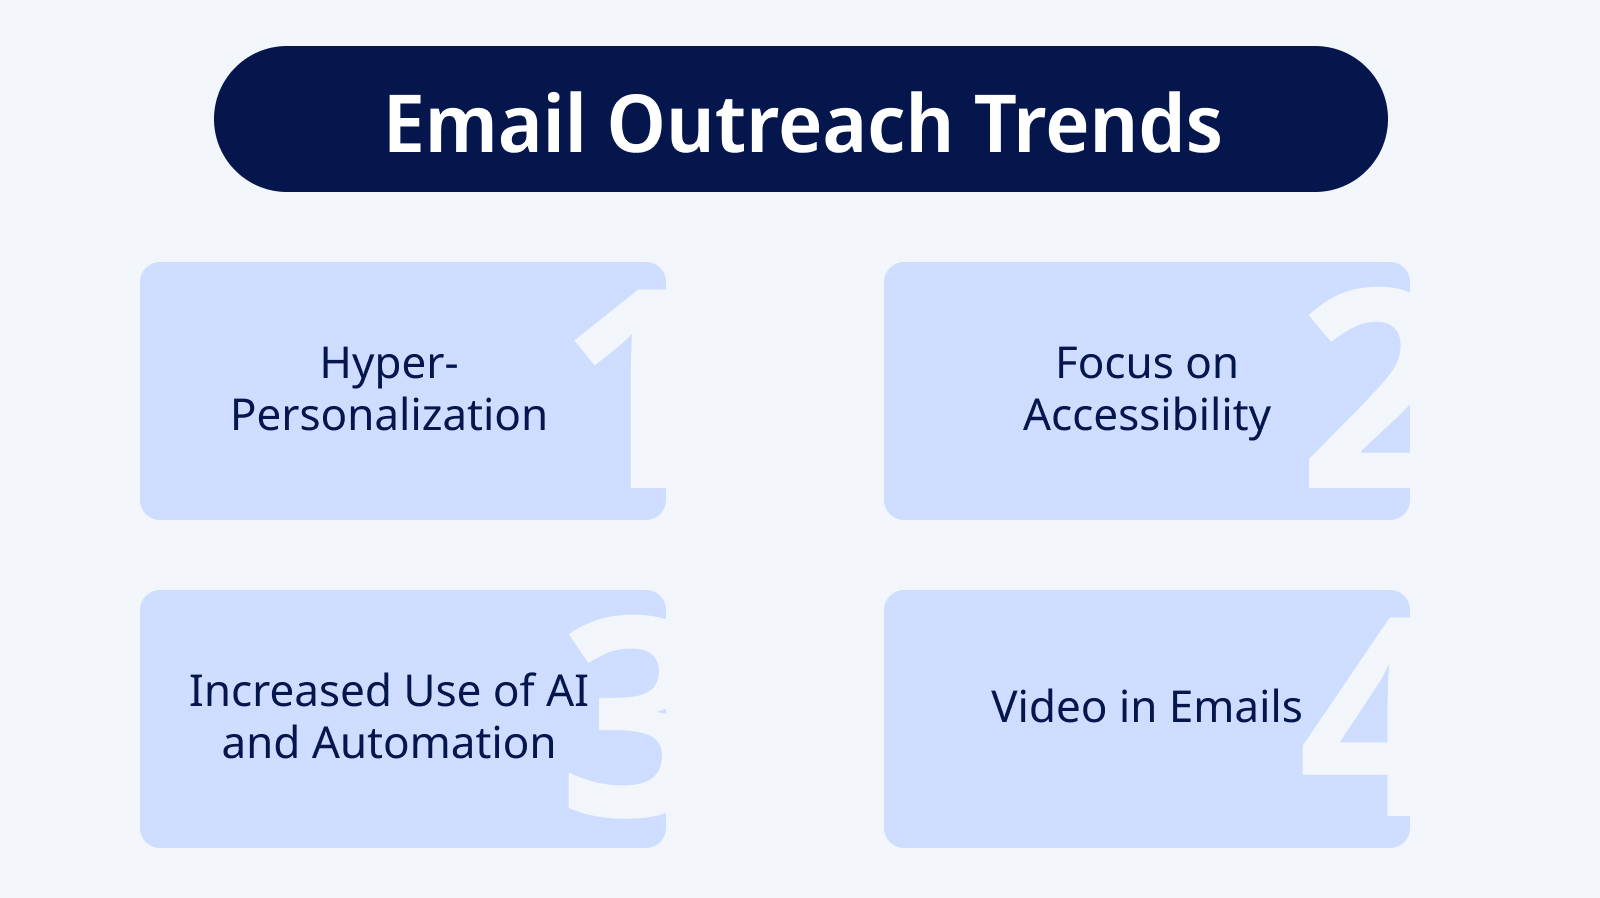 Email Outreach Trends